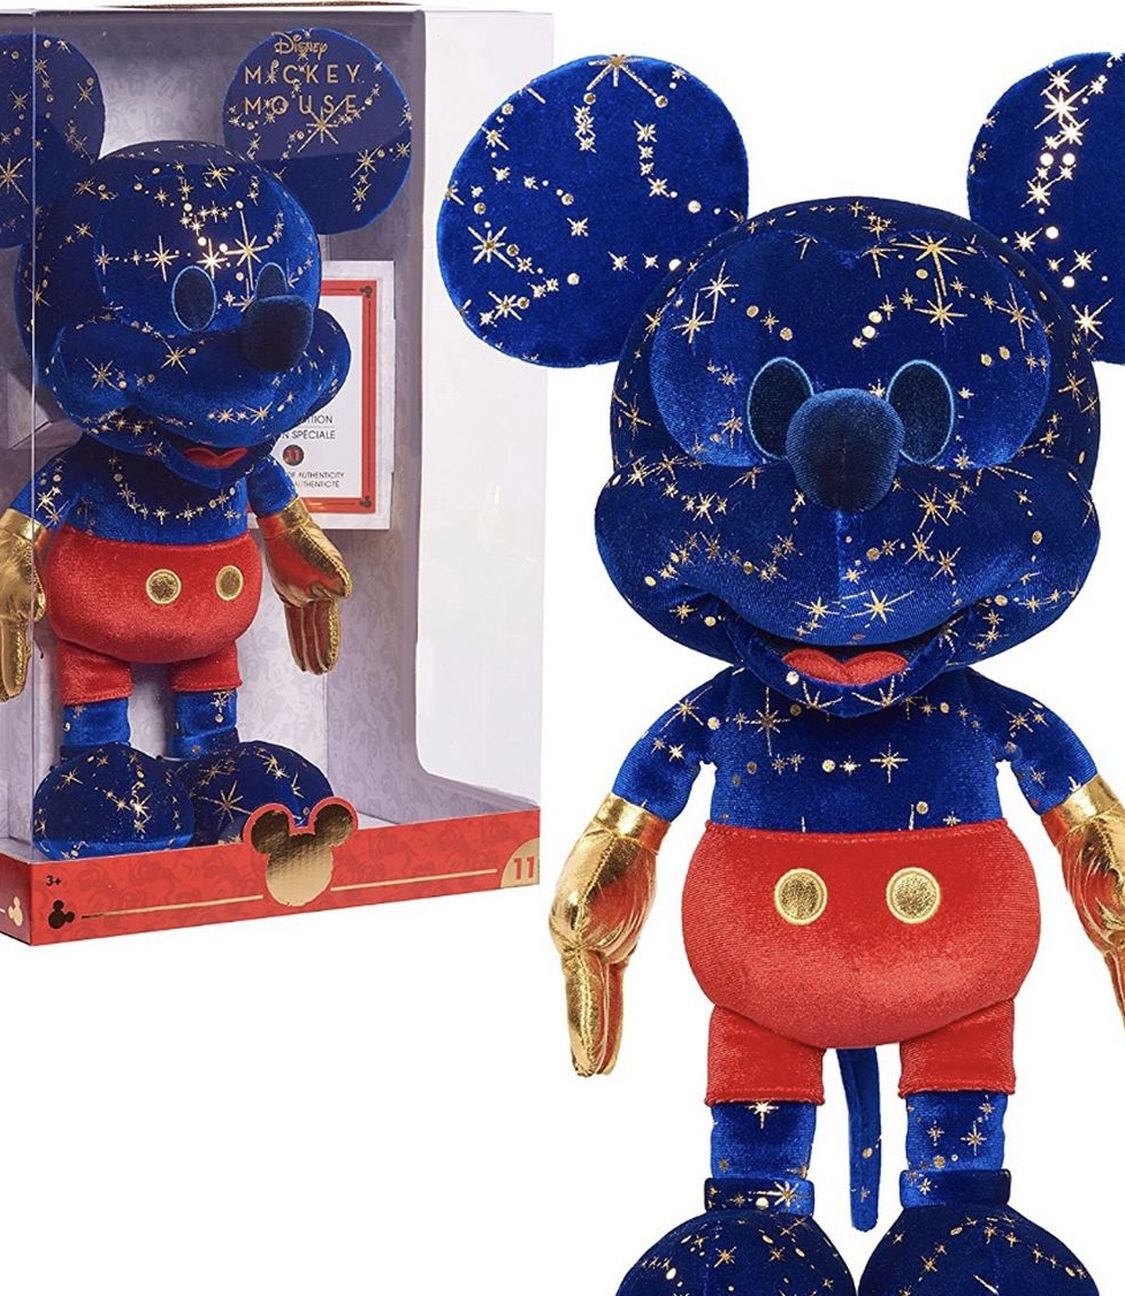 Disney Year Of The Mouse Limited Edition Plush - November Edition